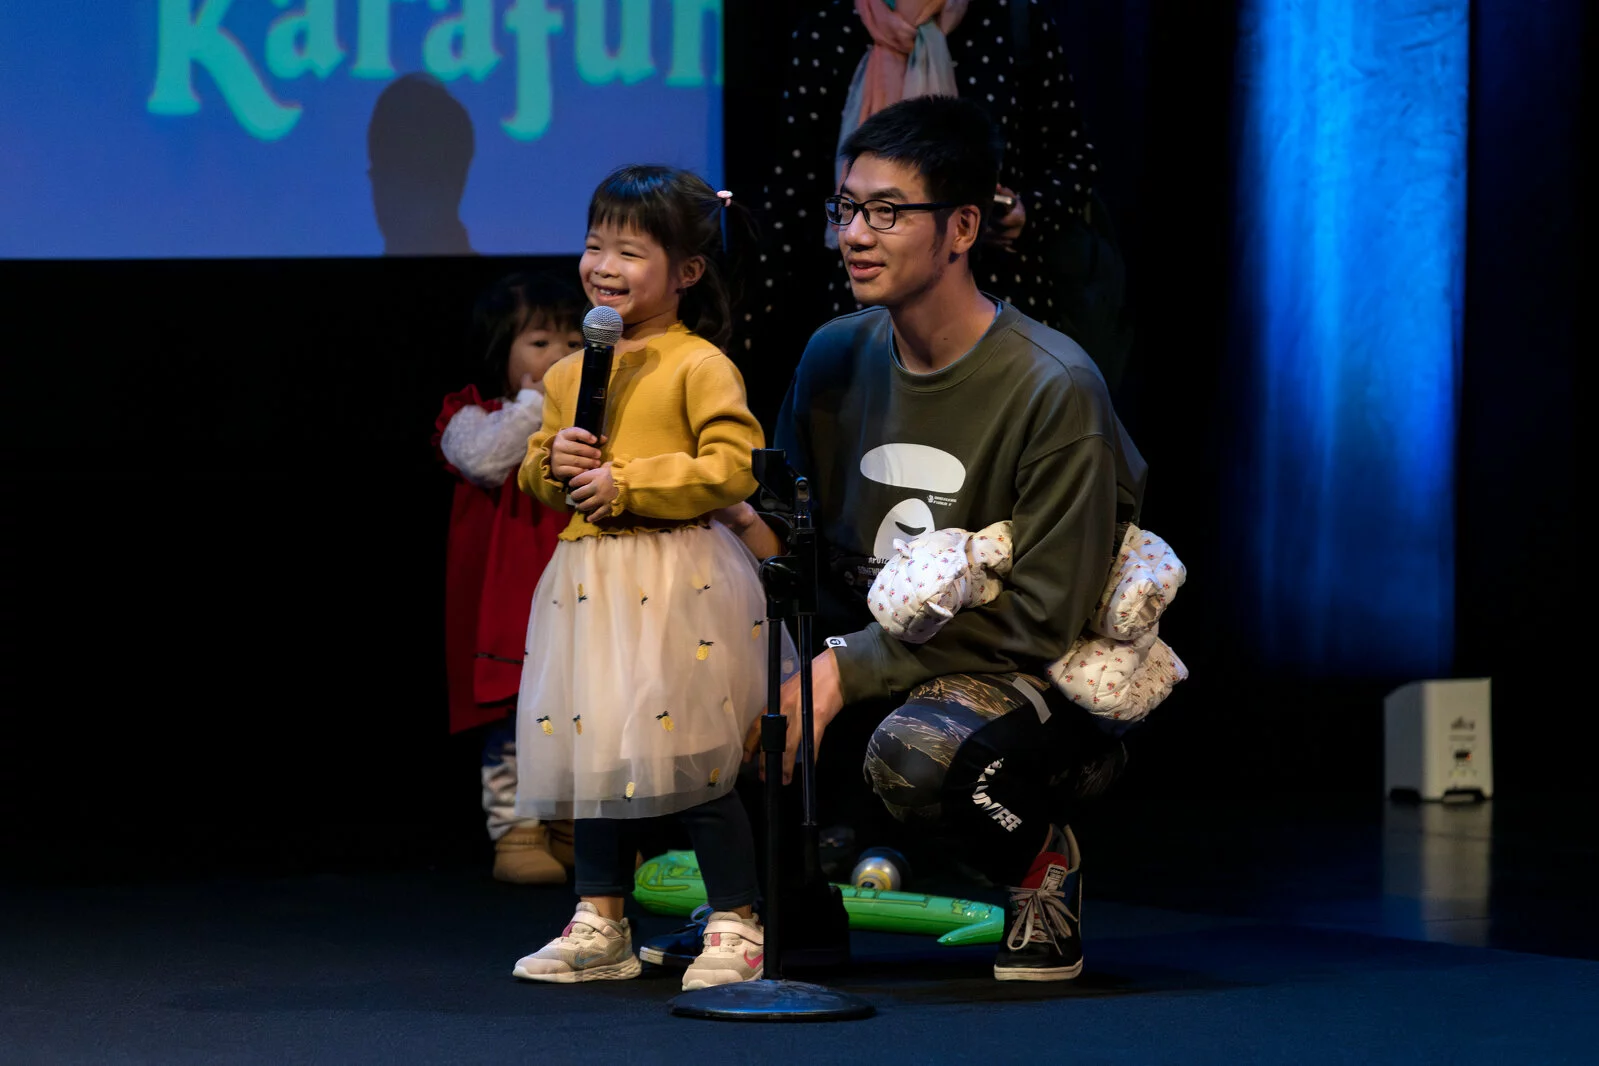 A child smiles while holding a microphone as their adult crouches beside them on a darkened stage.